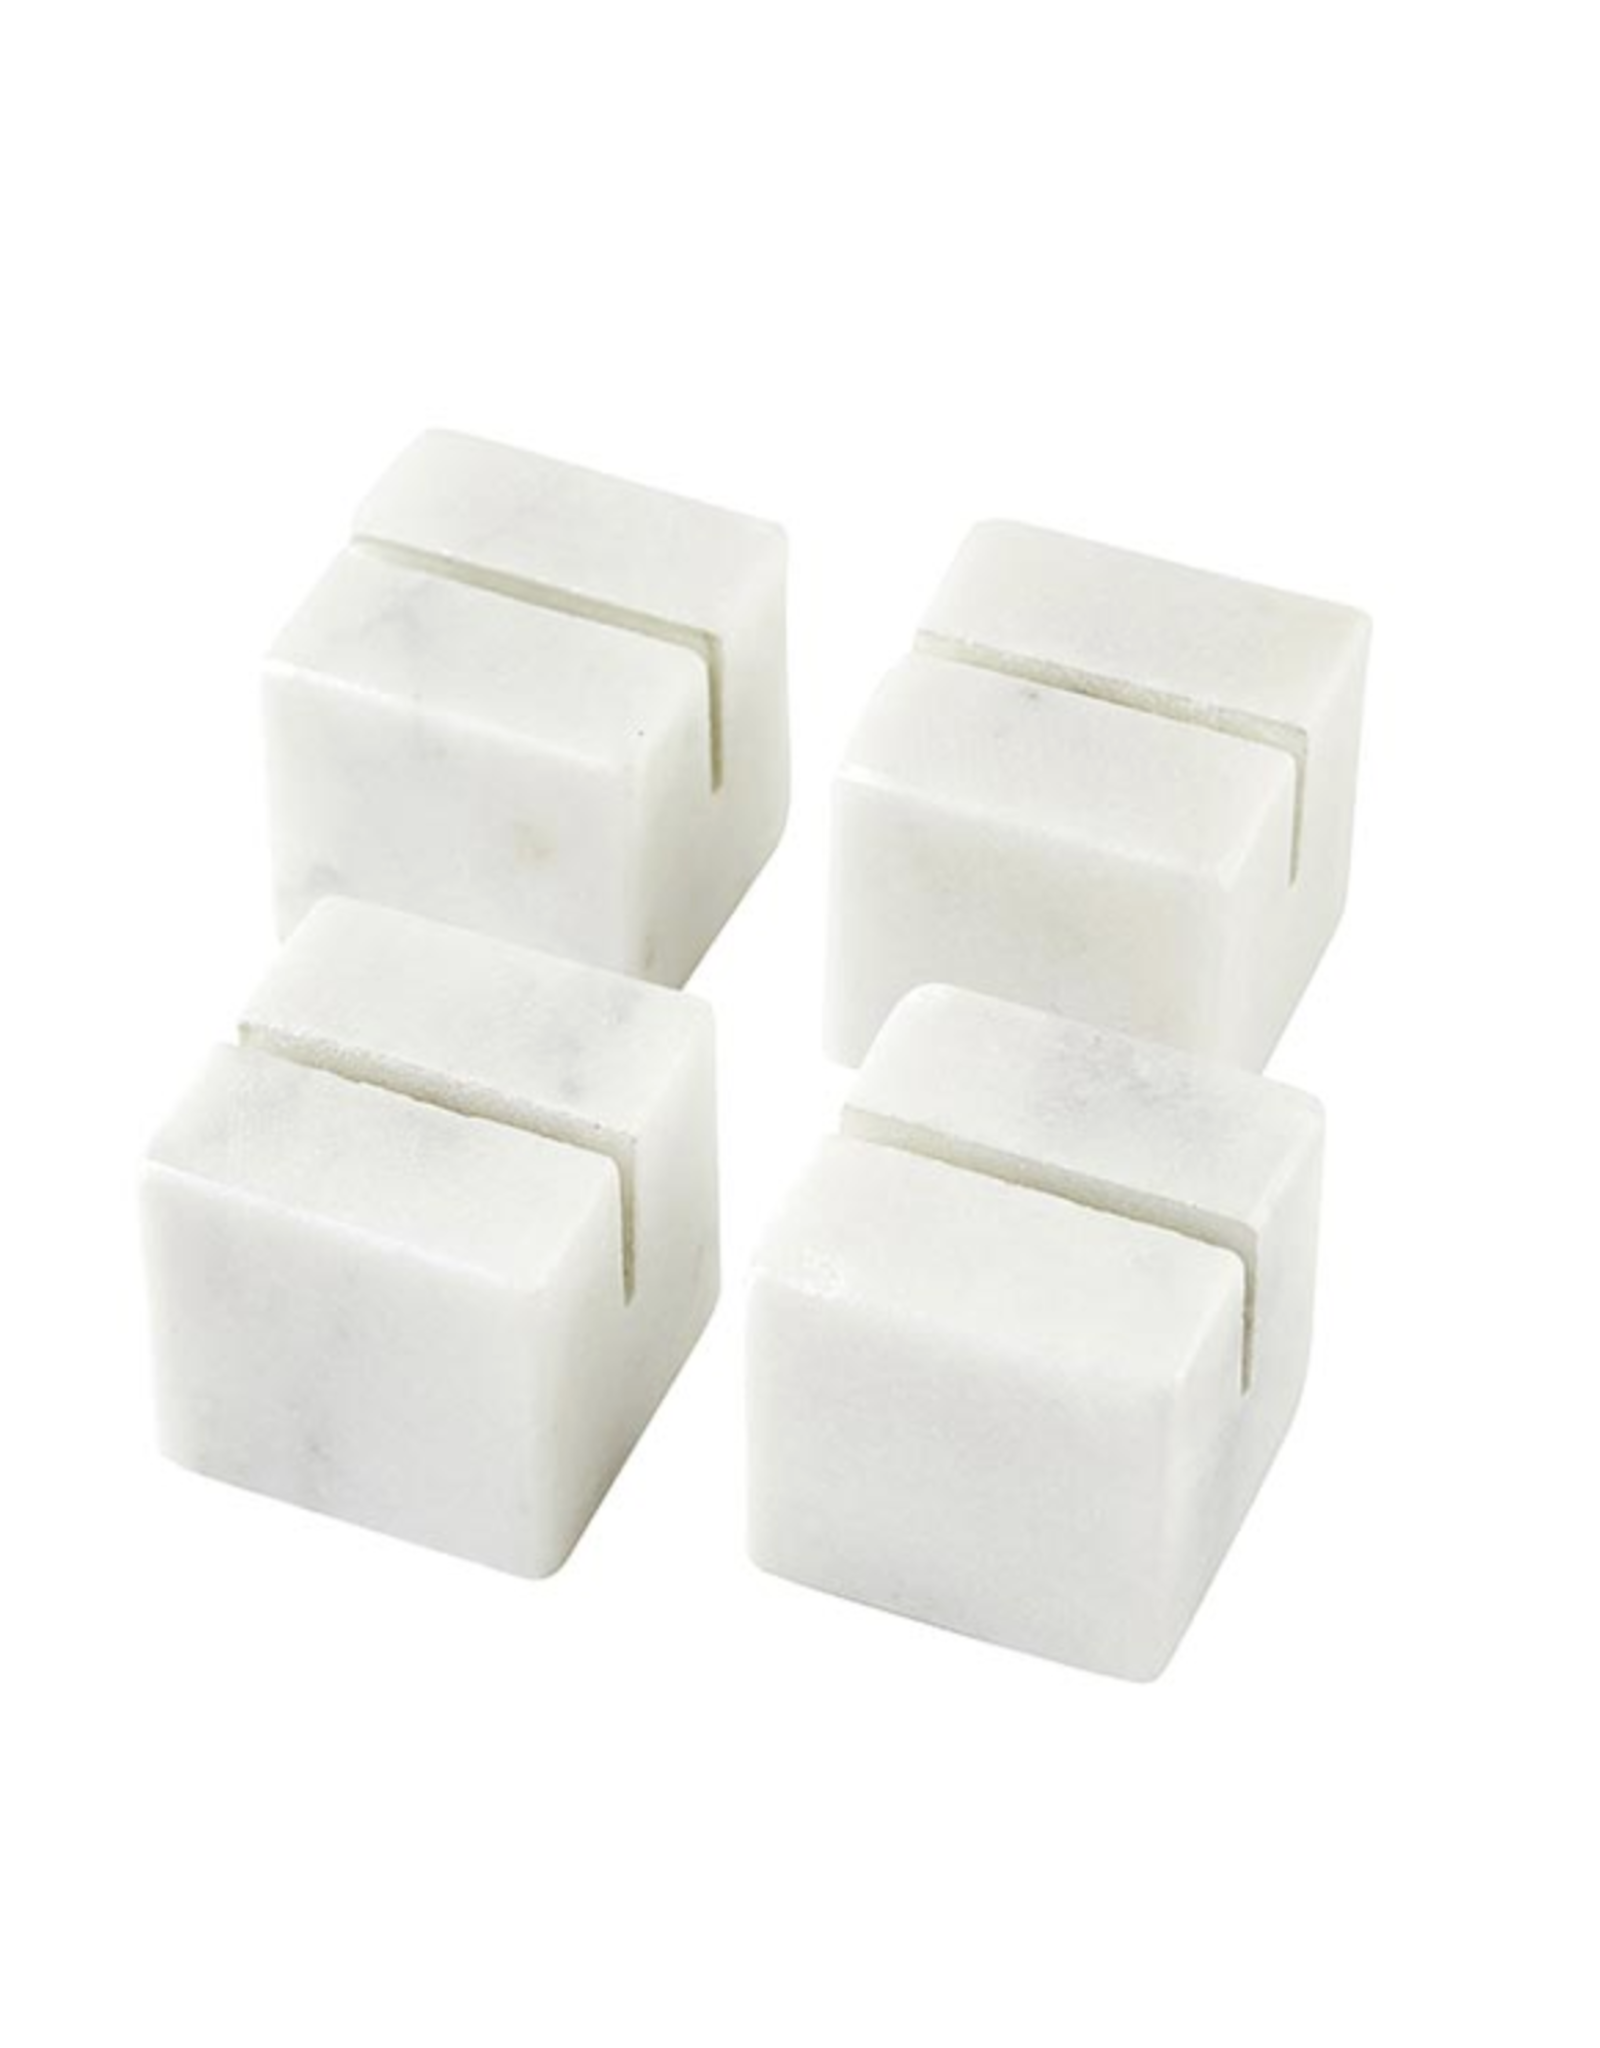 Creative Brands Marble Placecard Holder, set of 4